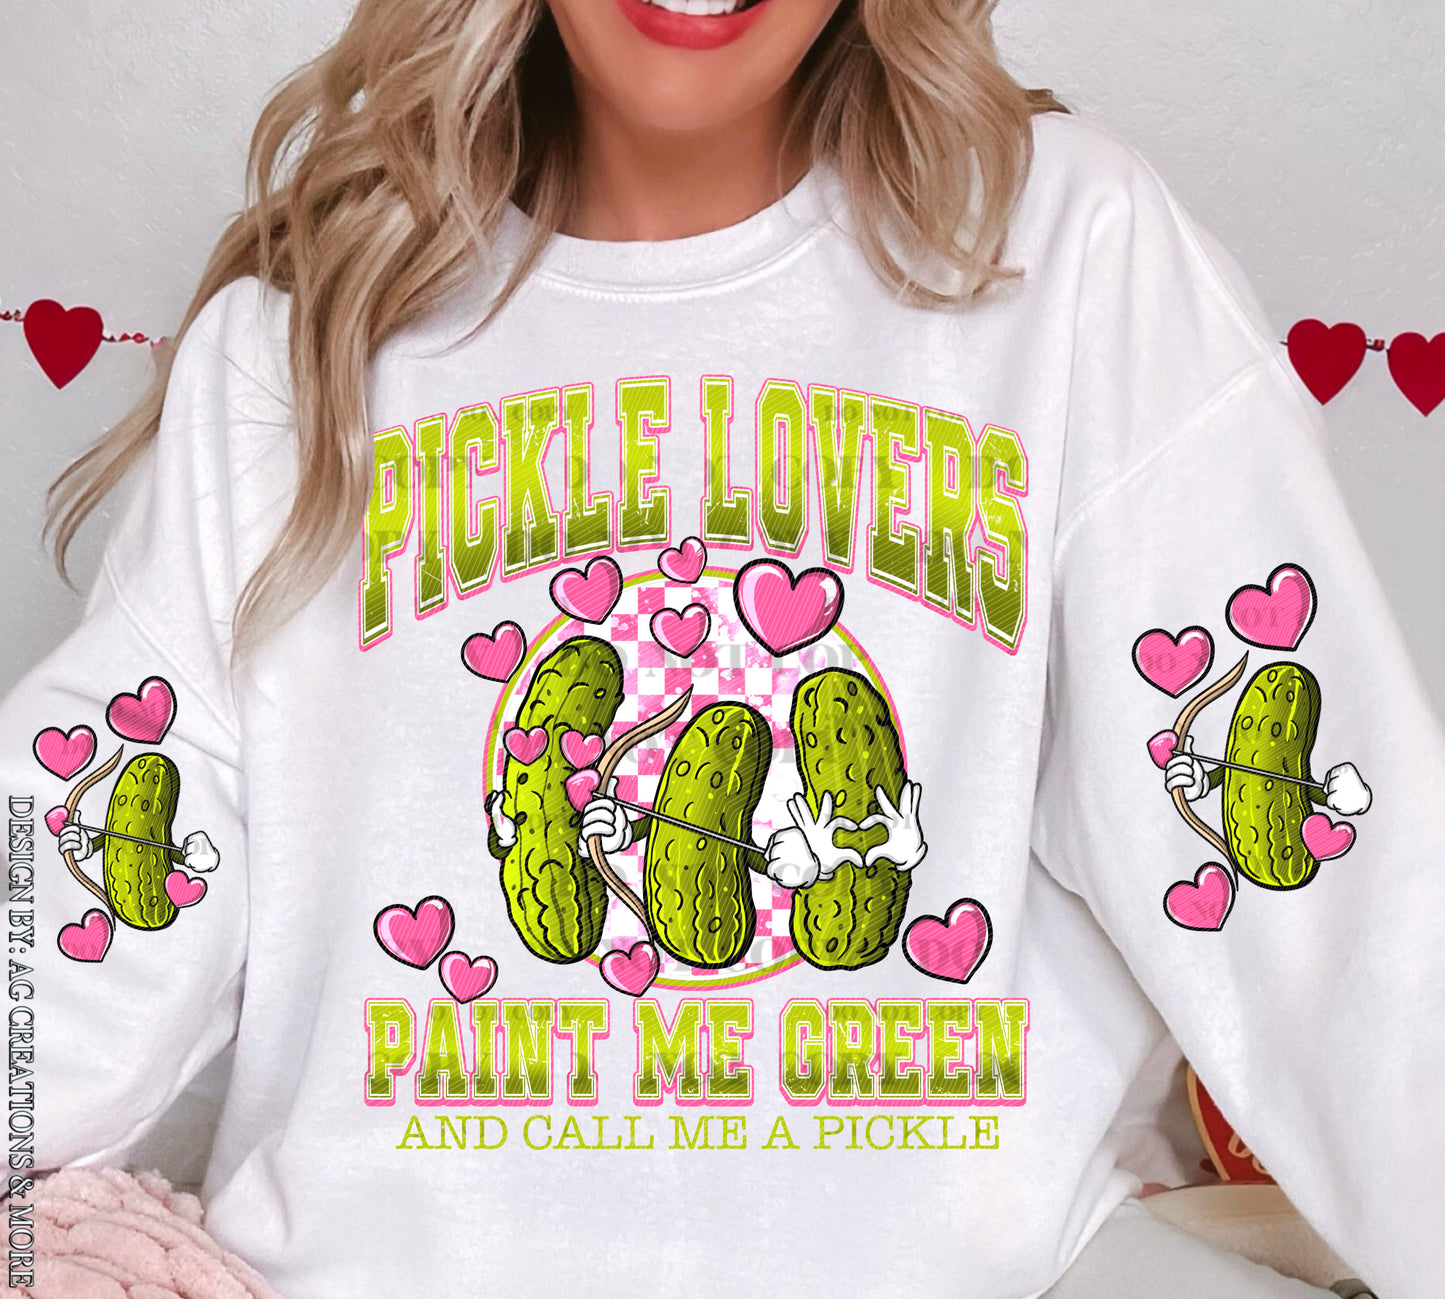 PICKLE LOVER WITH SLEEVES